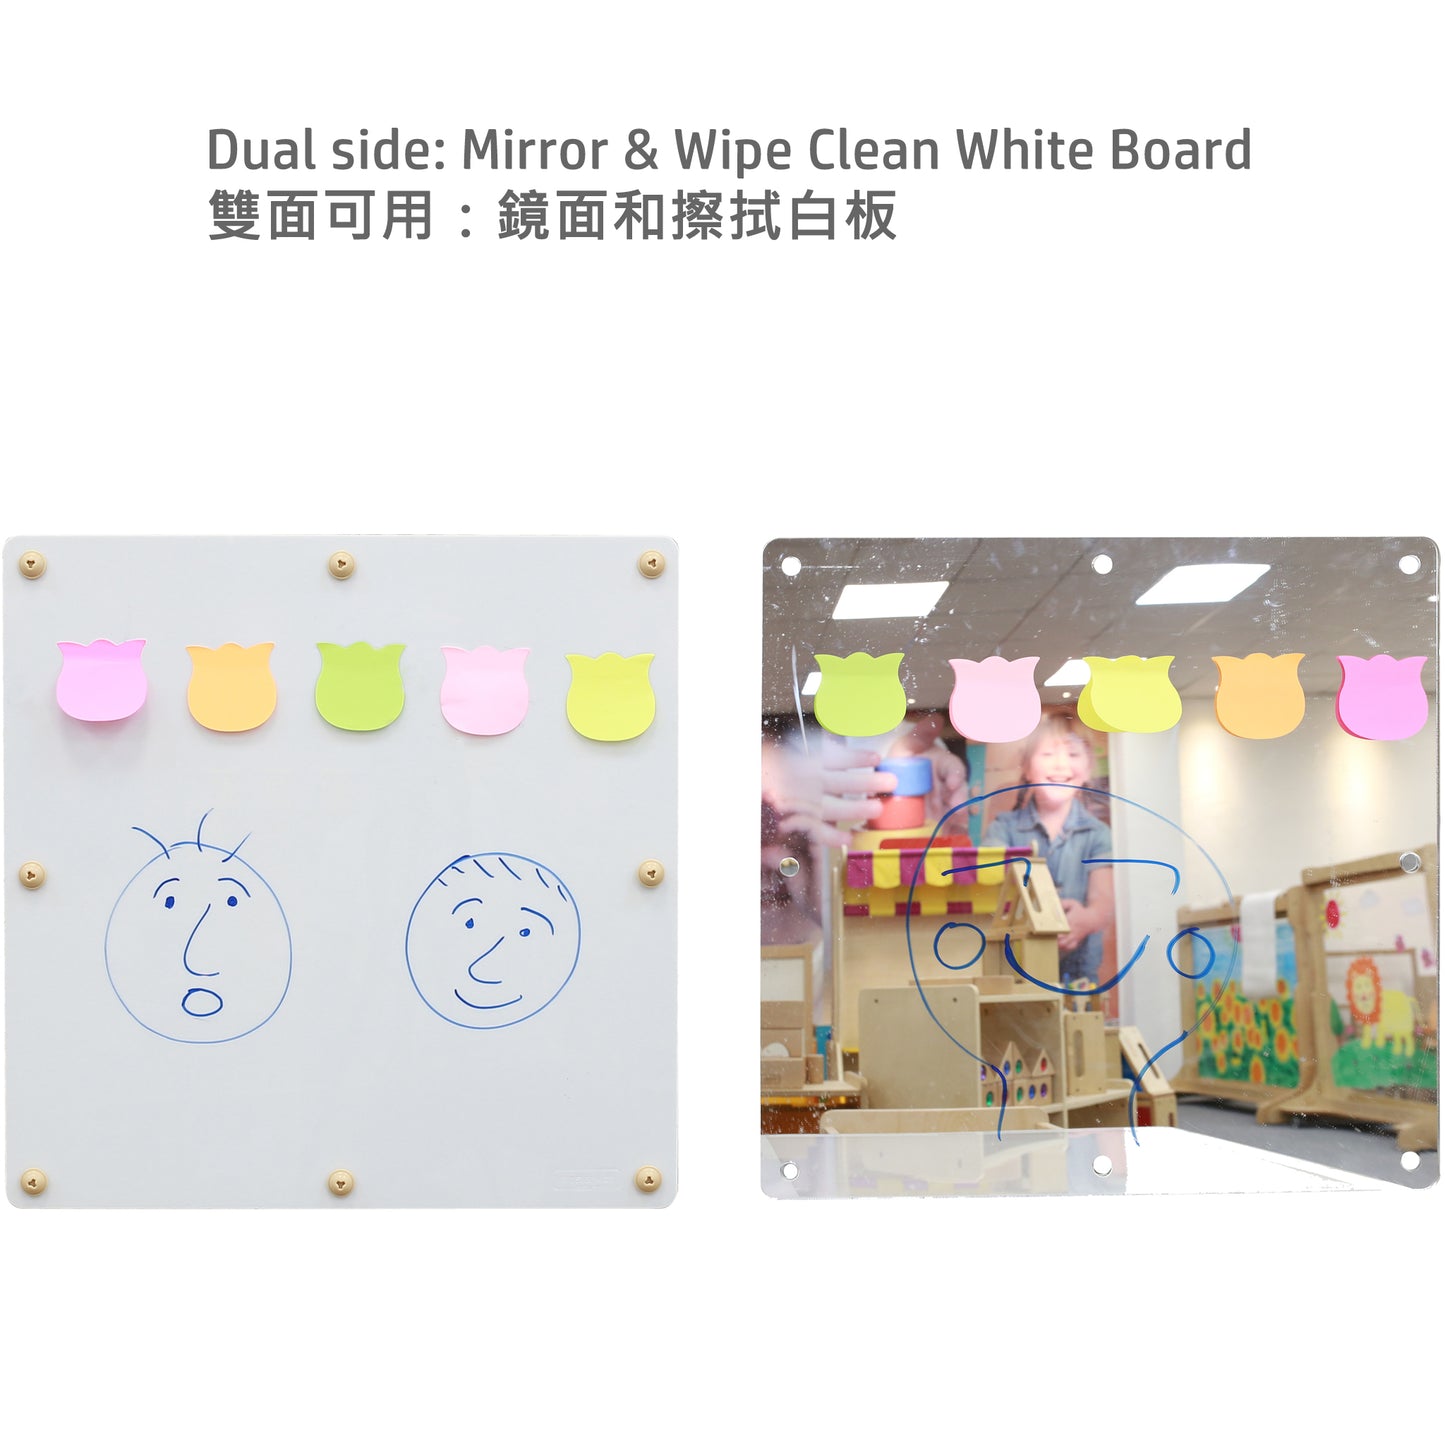 STEM WALL 548H x 548L Double Sided Dry Wipe and Mirror Panel 雙面可用 可擦寫白板及亞克力鏡子